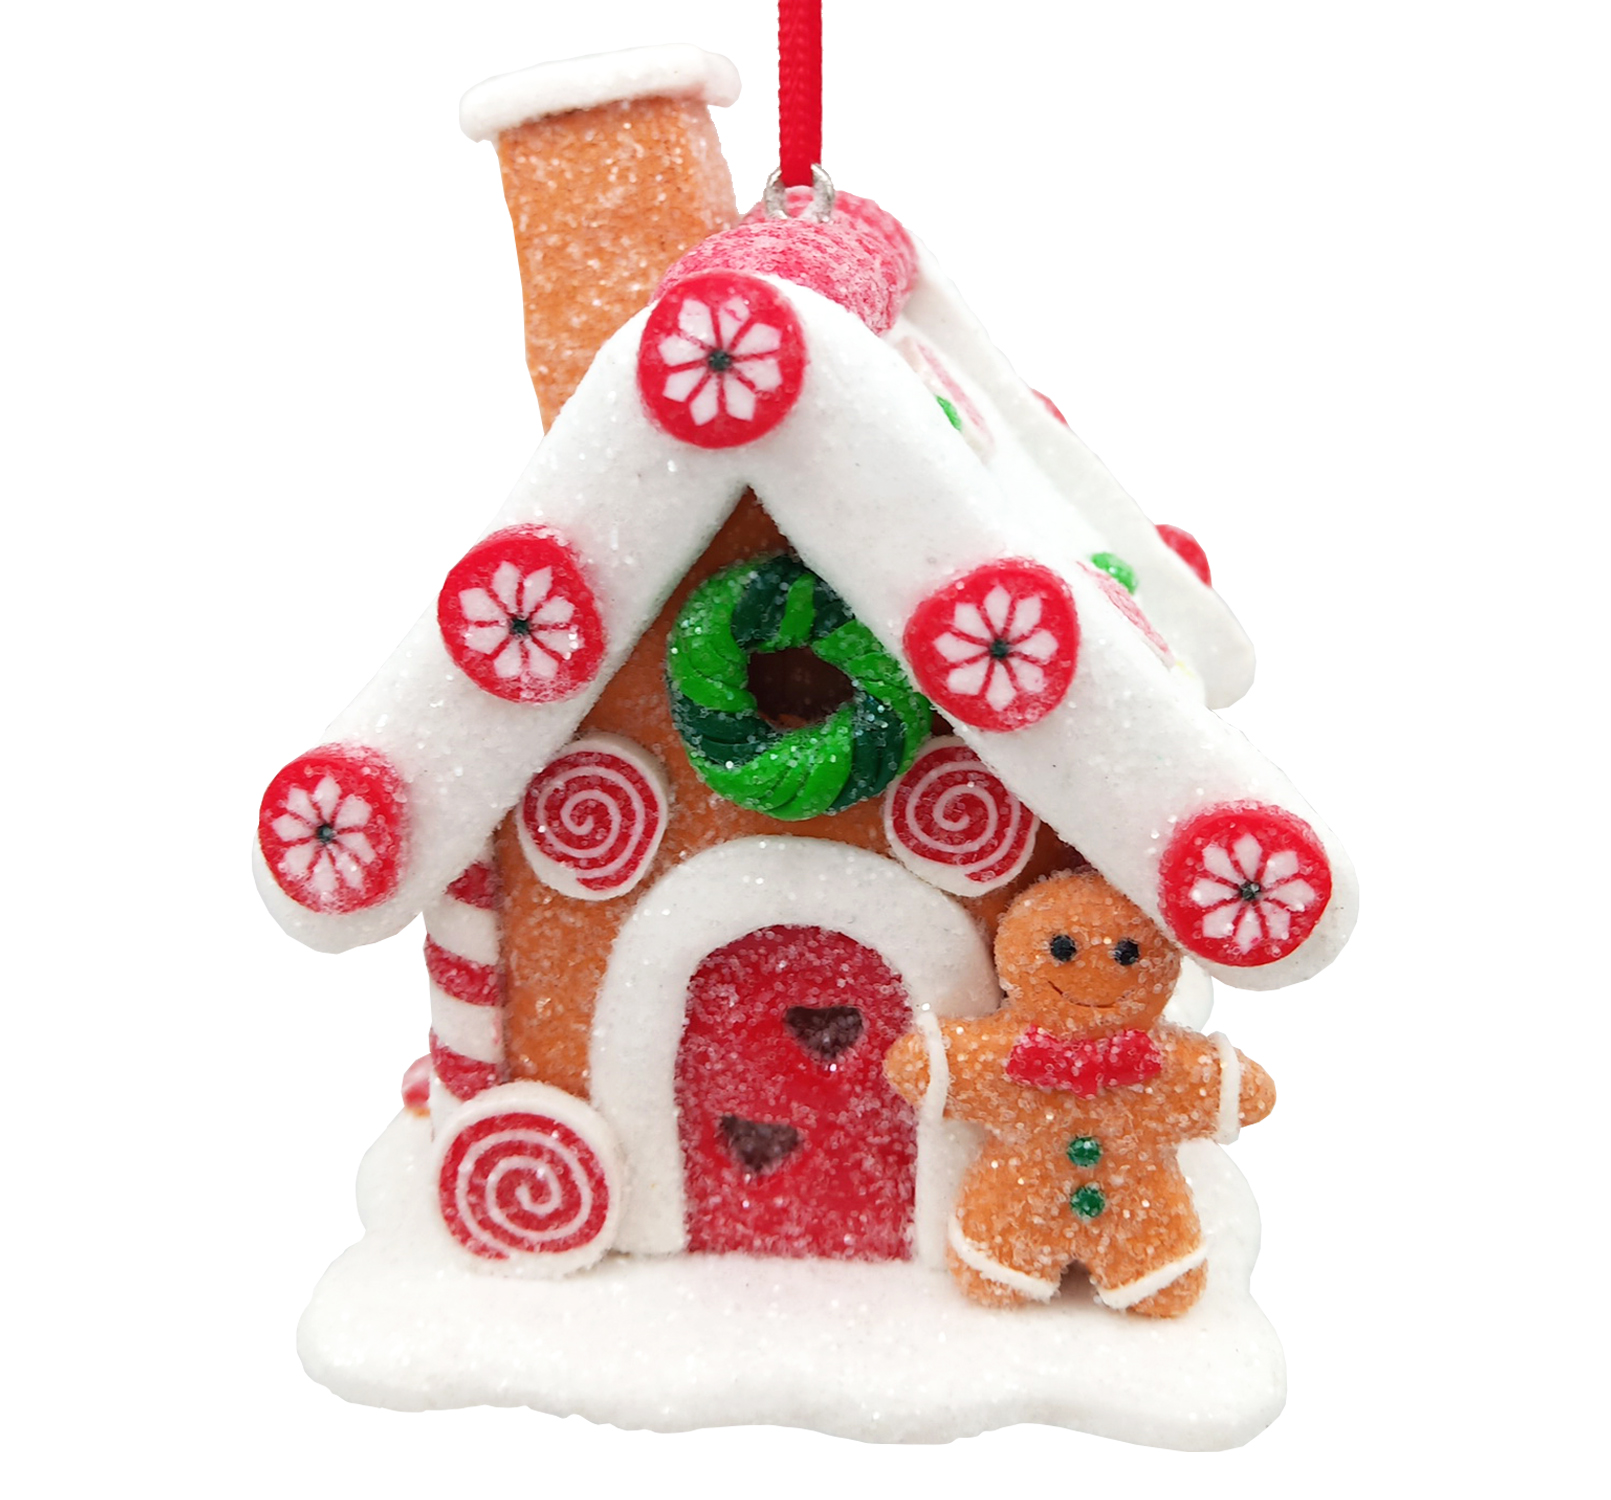 ORN GINGERBREAD HOUSE 2.5